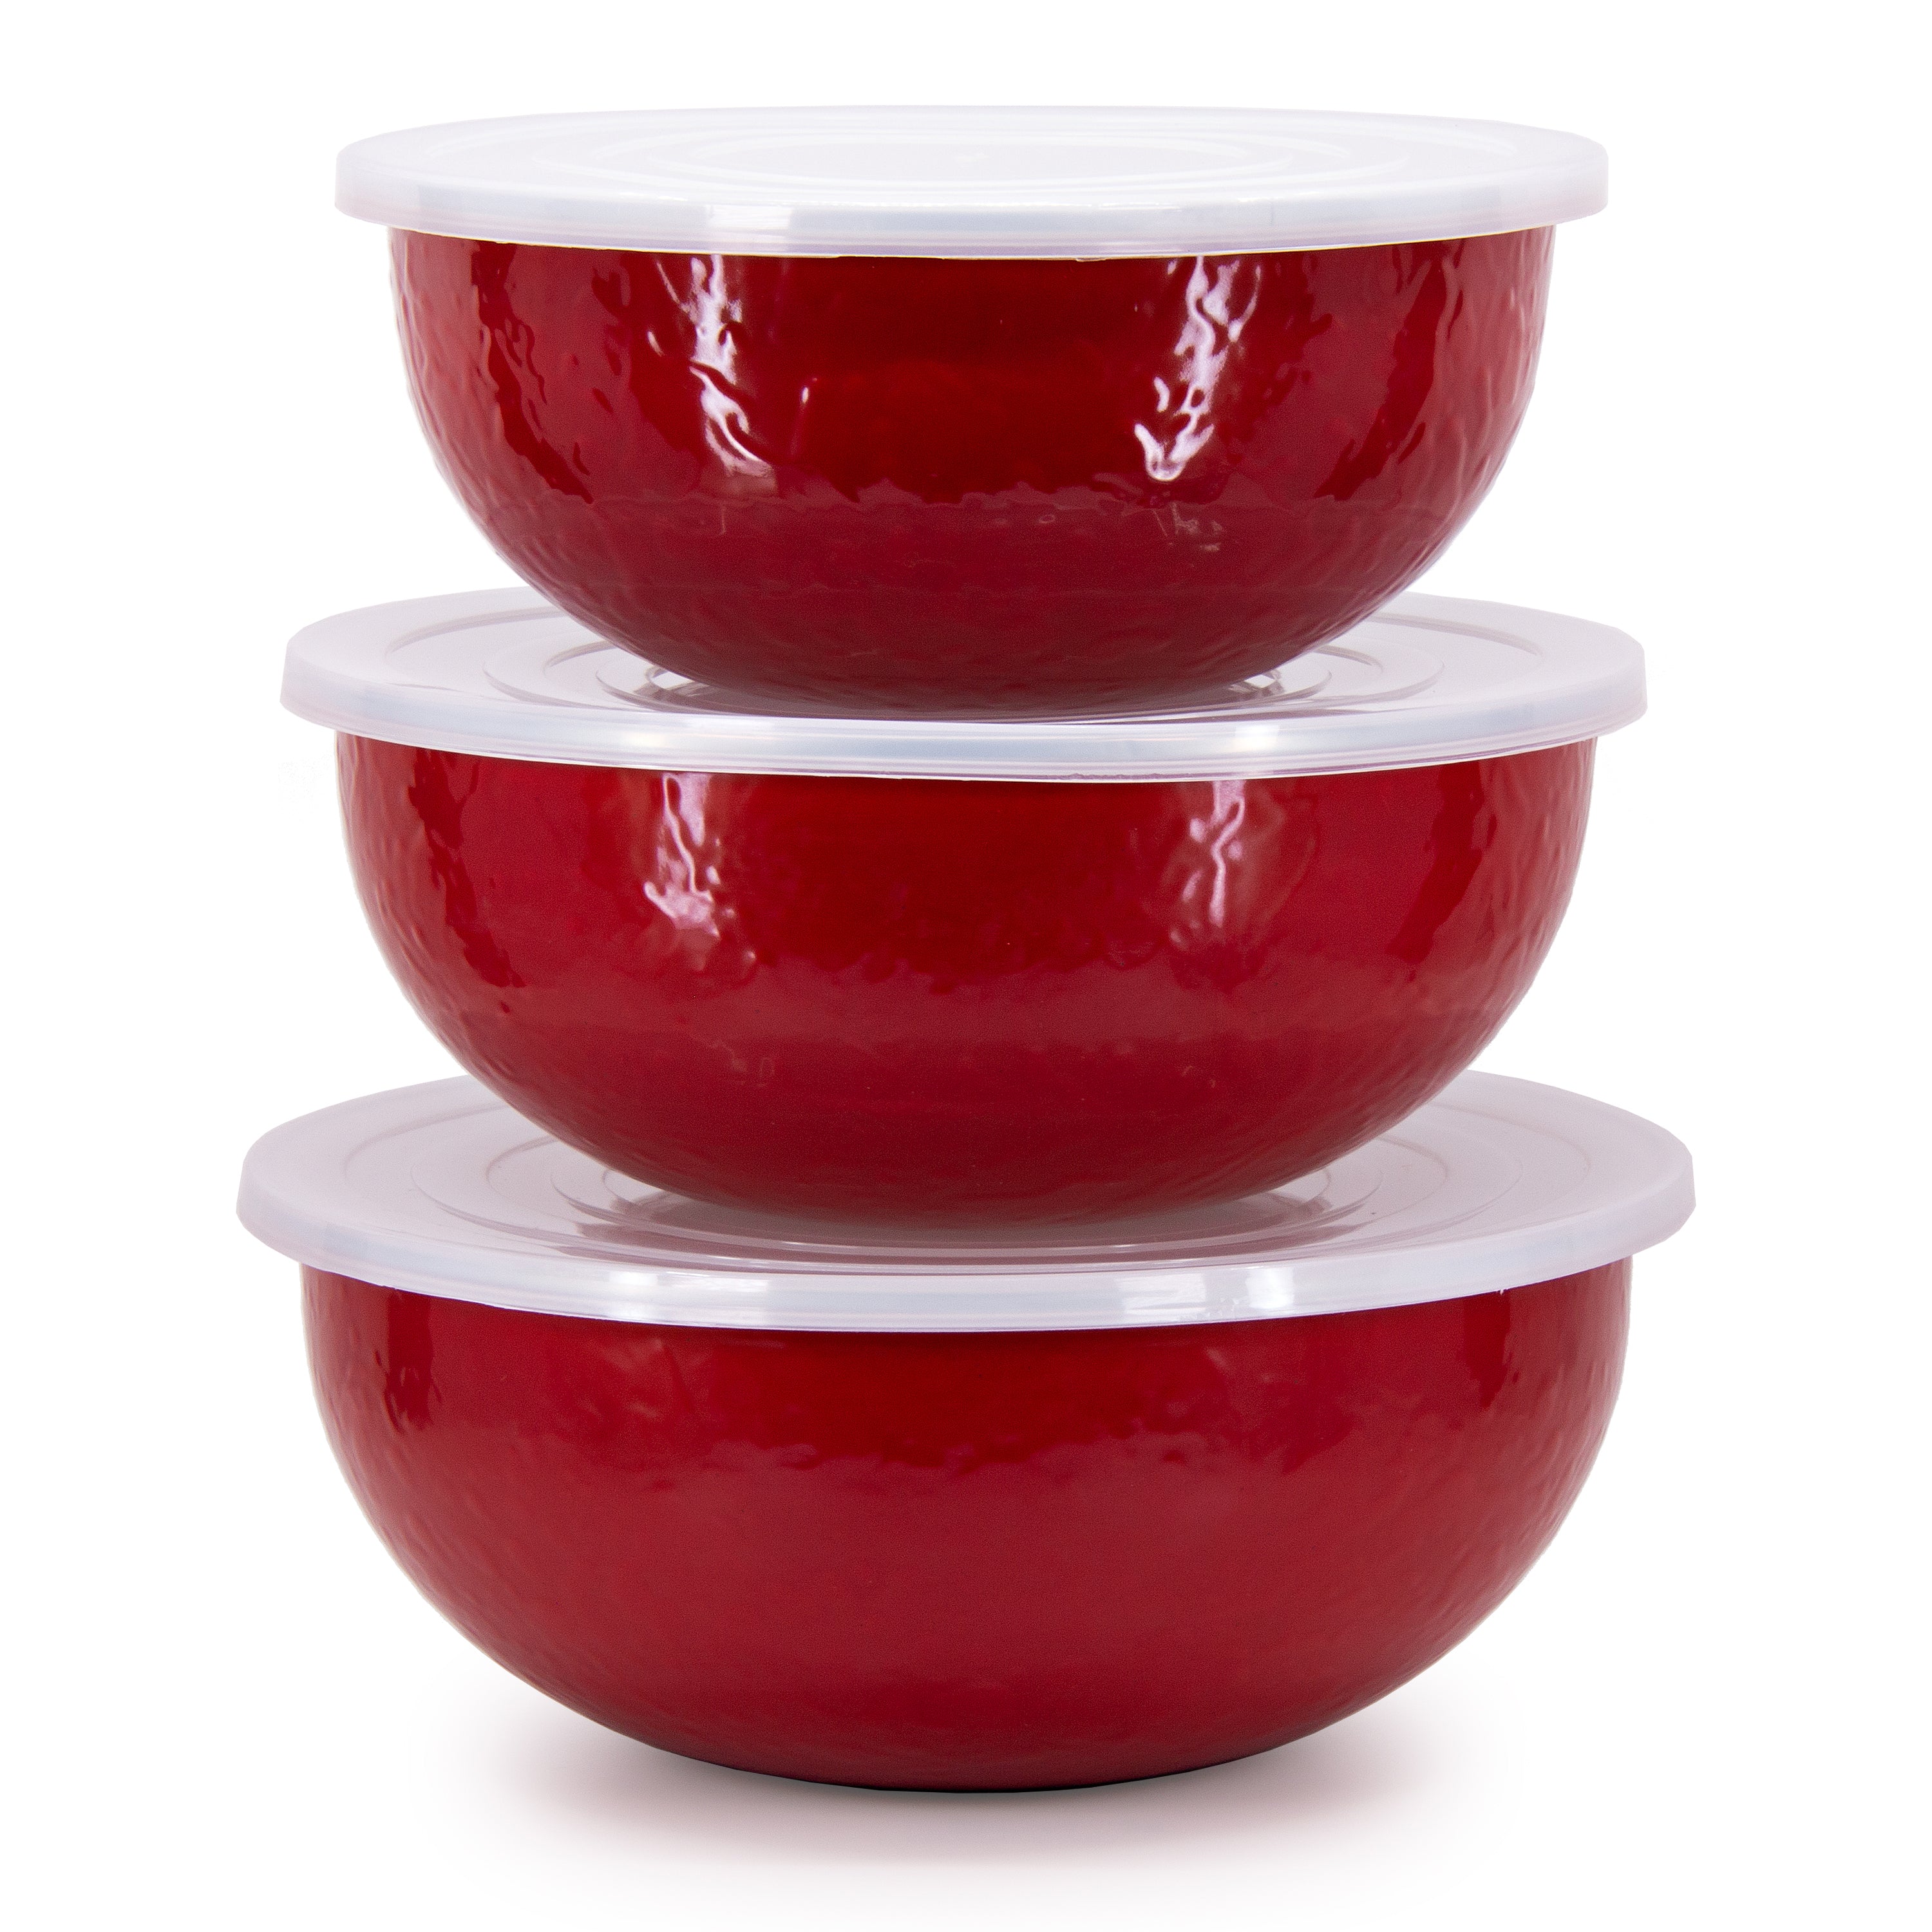 Wayfair, Red Mixing Bowls, Up to 40% Off Until 11/20